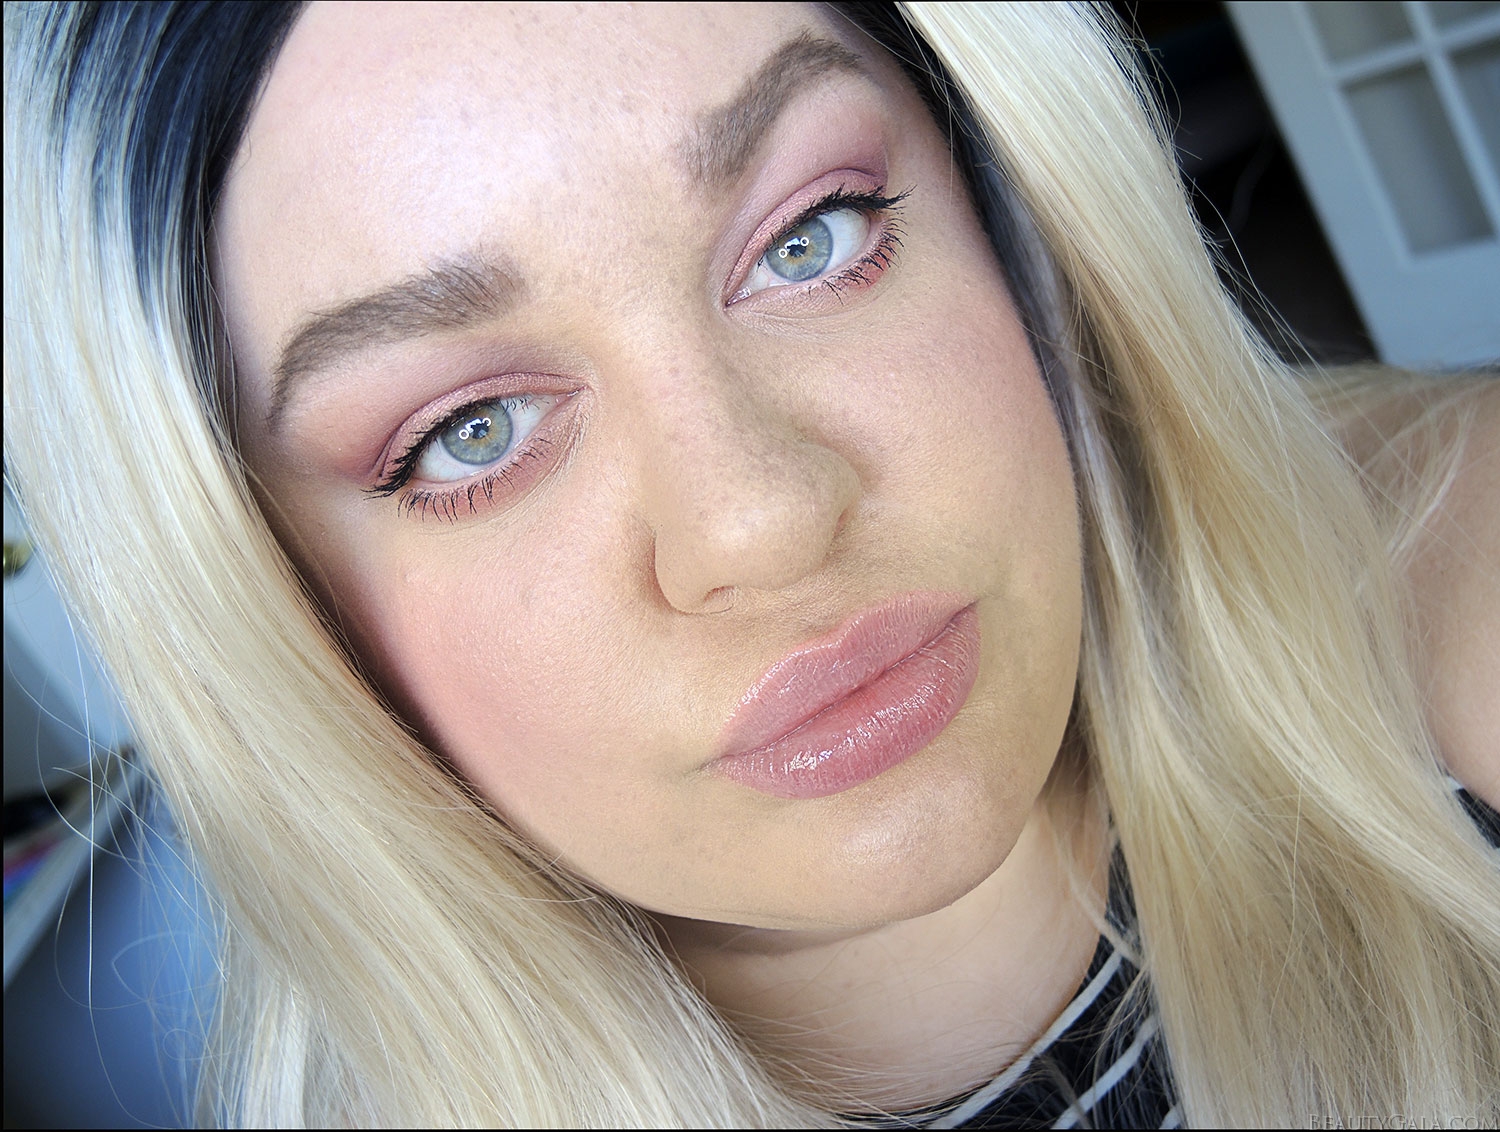 maybelline blushed avenue, blushed avenue palette, maybelline the city mini palette, faux freckles, dior lip glow, benefit brows